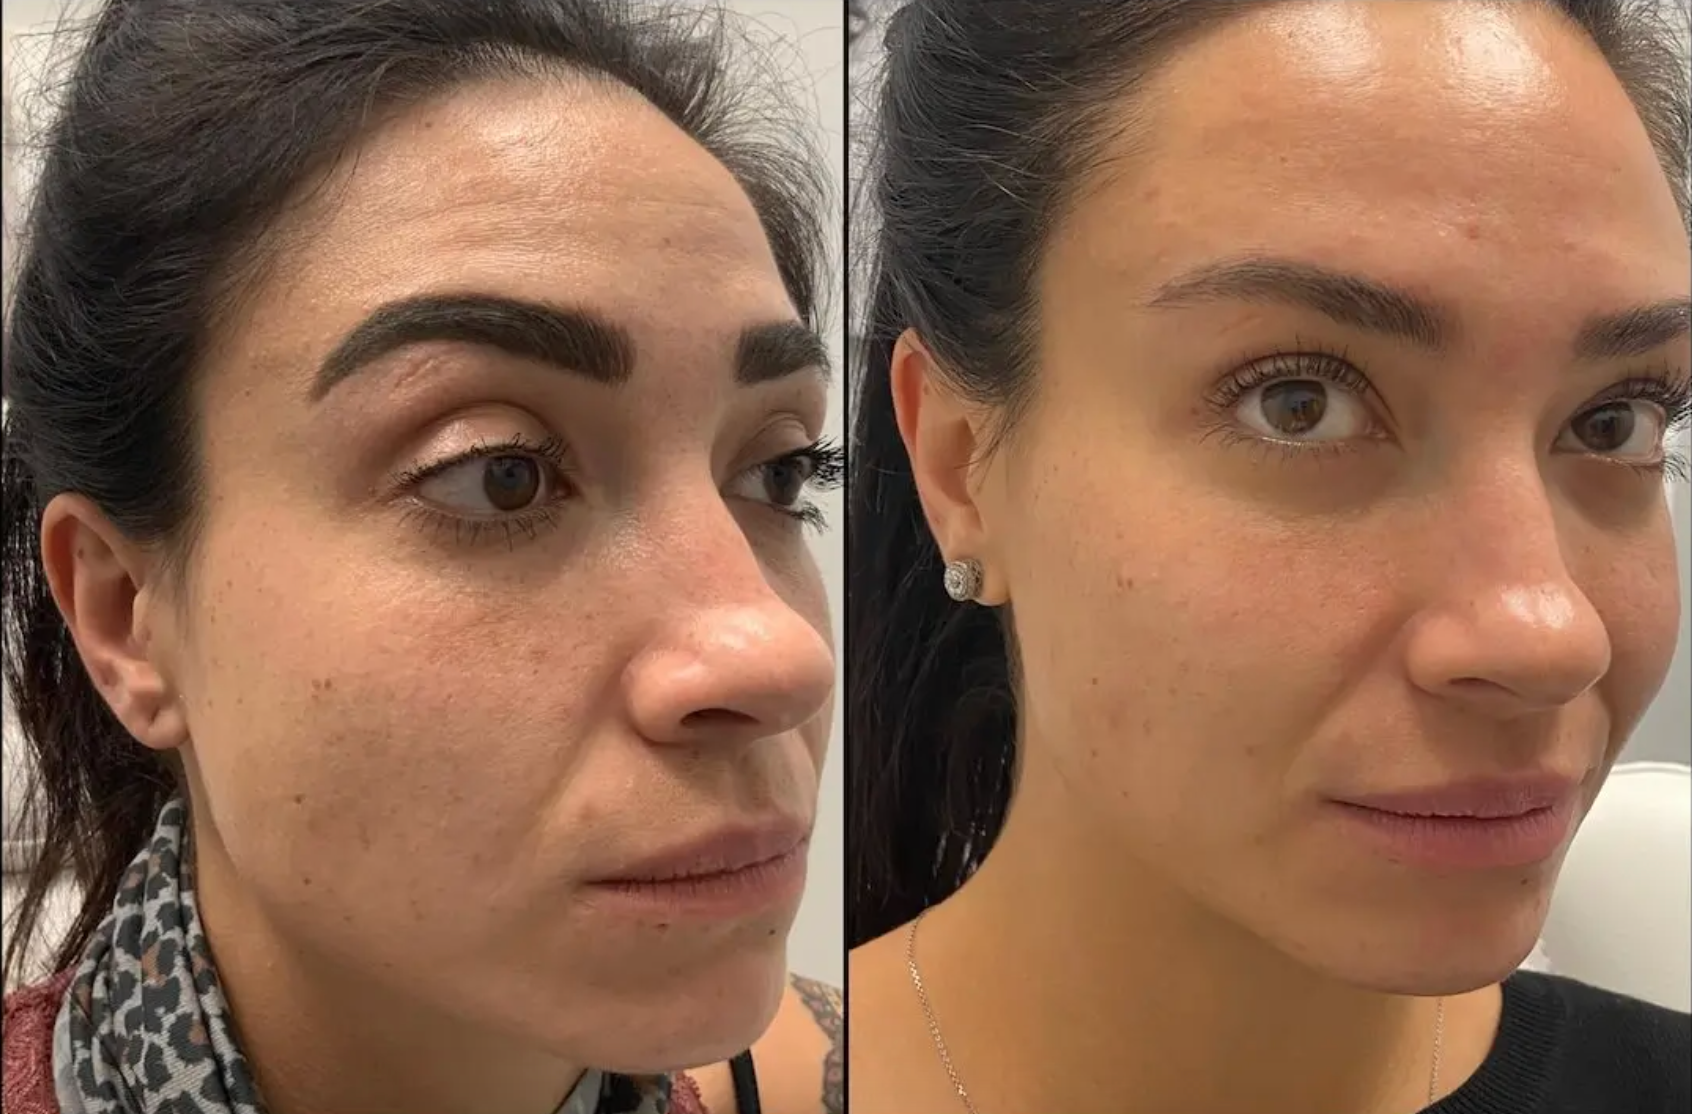 Before and after facial treatment with neurotoxin and dermal filler in the forehead and brow for smooth skin